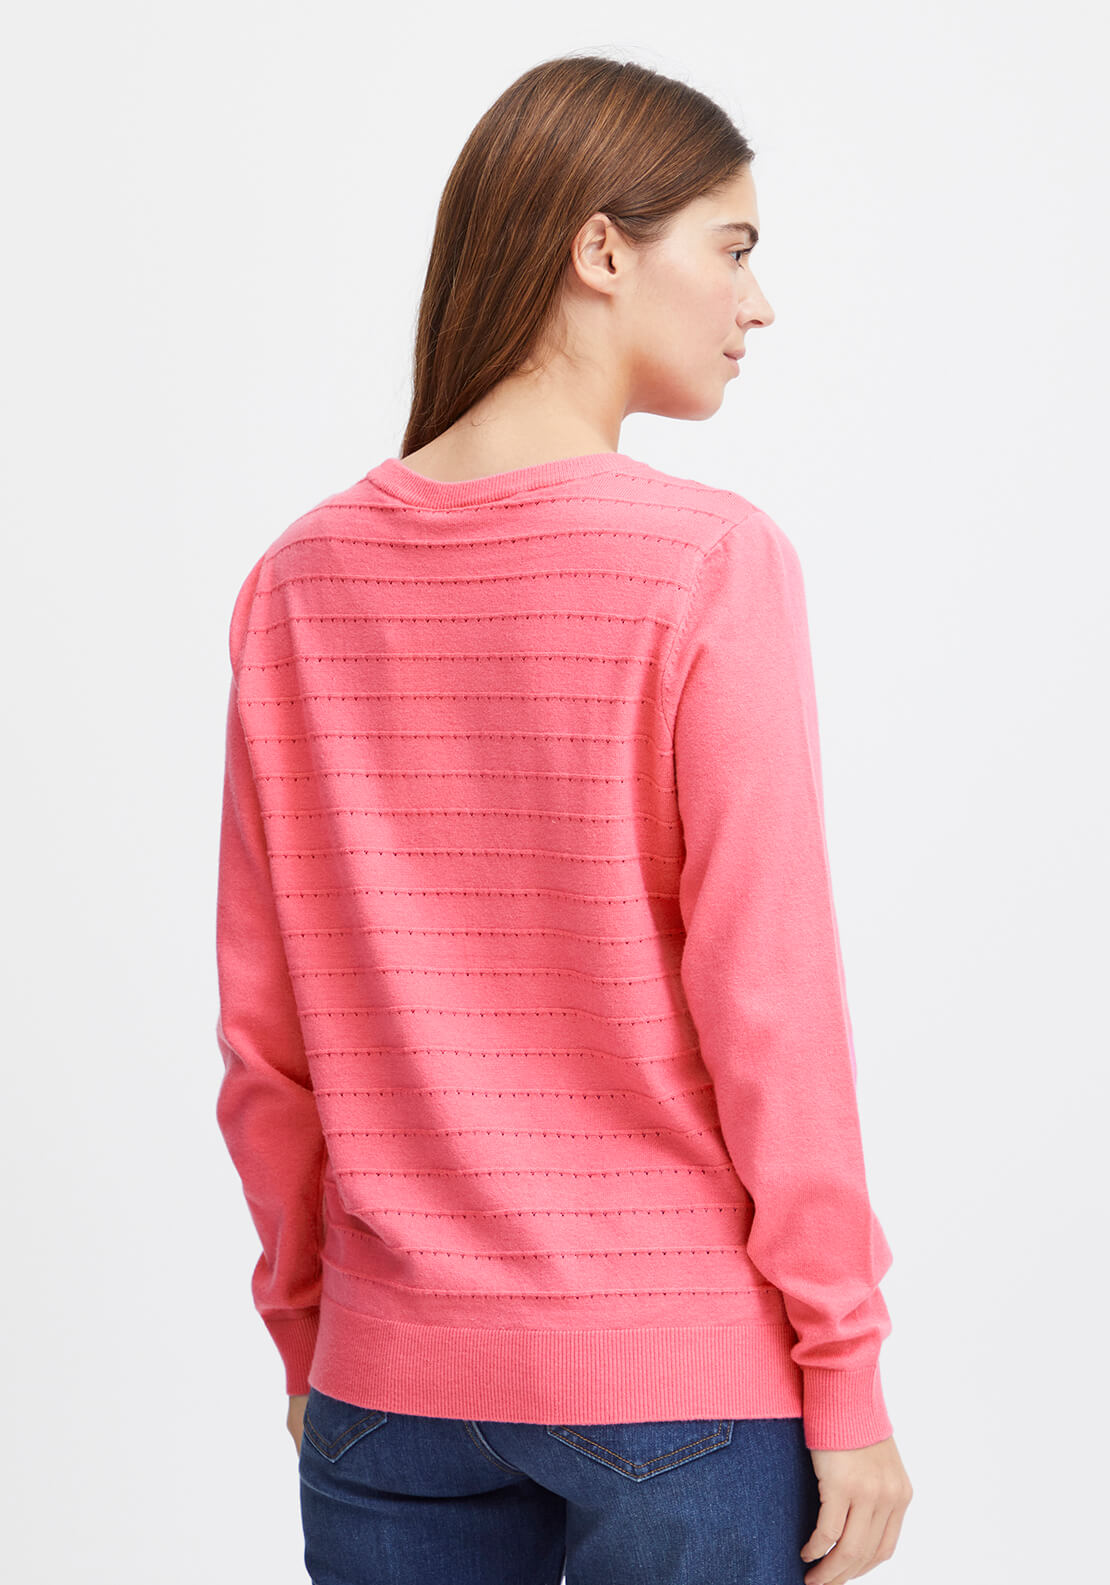 Fransa Knit Pullover 2 Shaws Department Stores